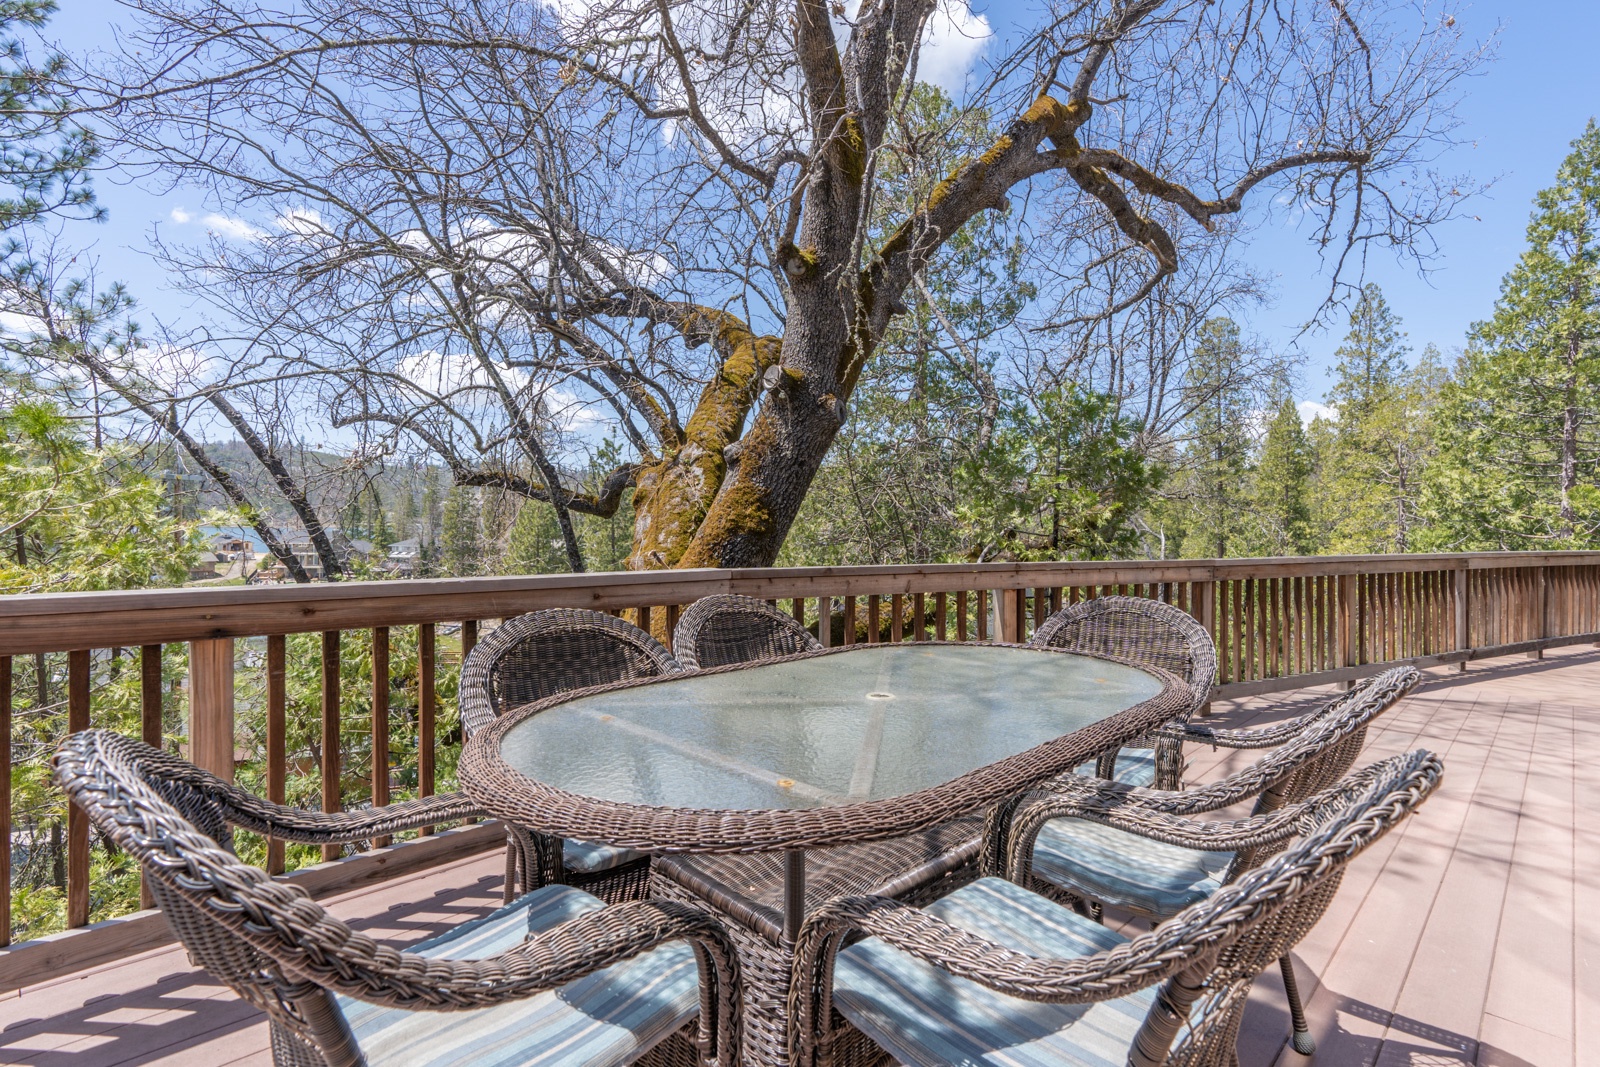 Lounge and dine in the sunshine on the expansive back deck